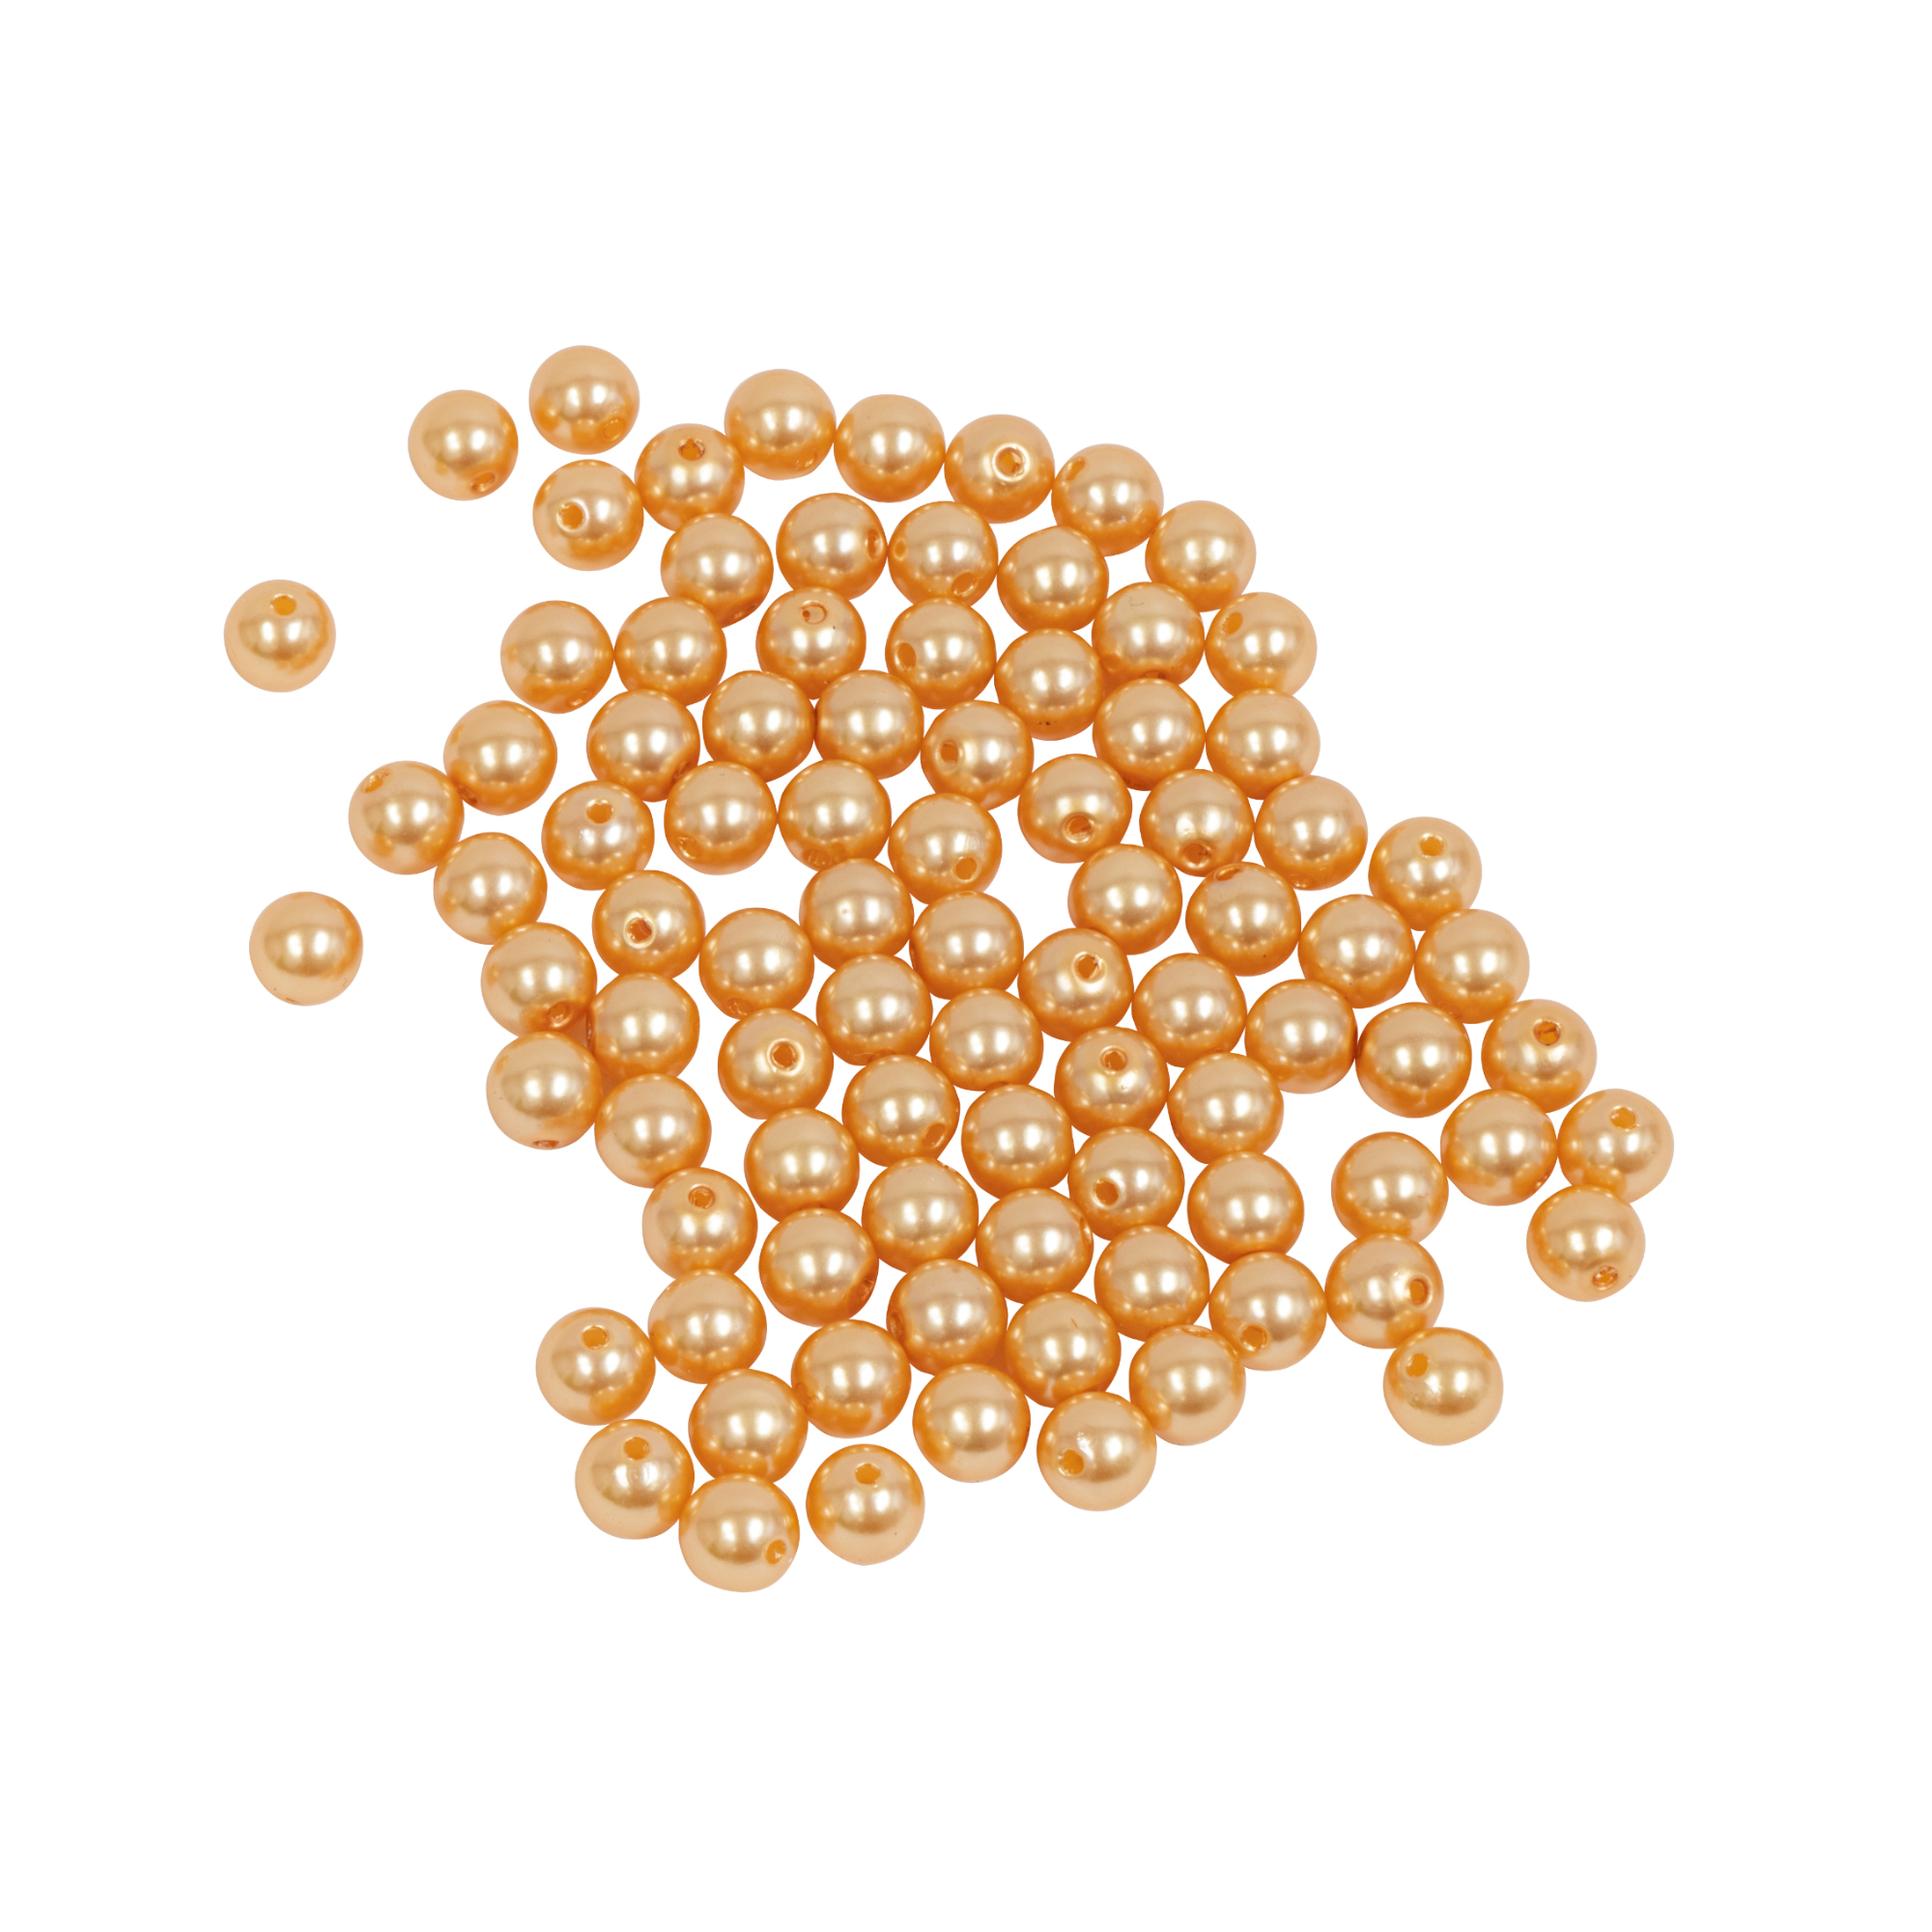 10mm Craft Pearl Beads With Hole 454g/Bag - Gold